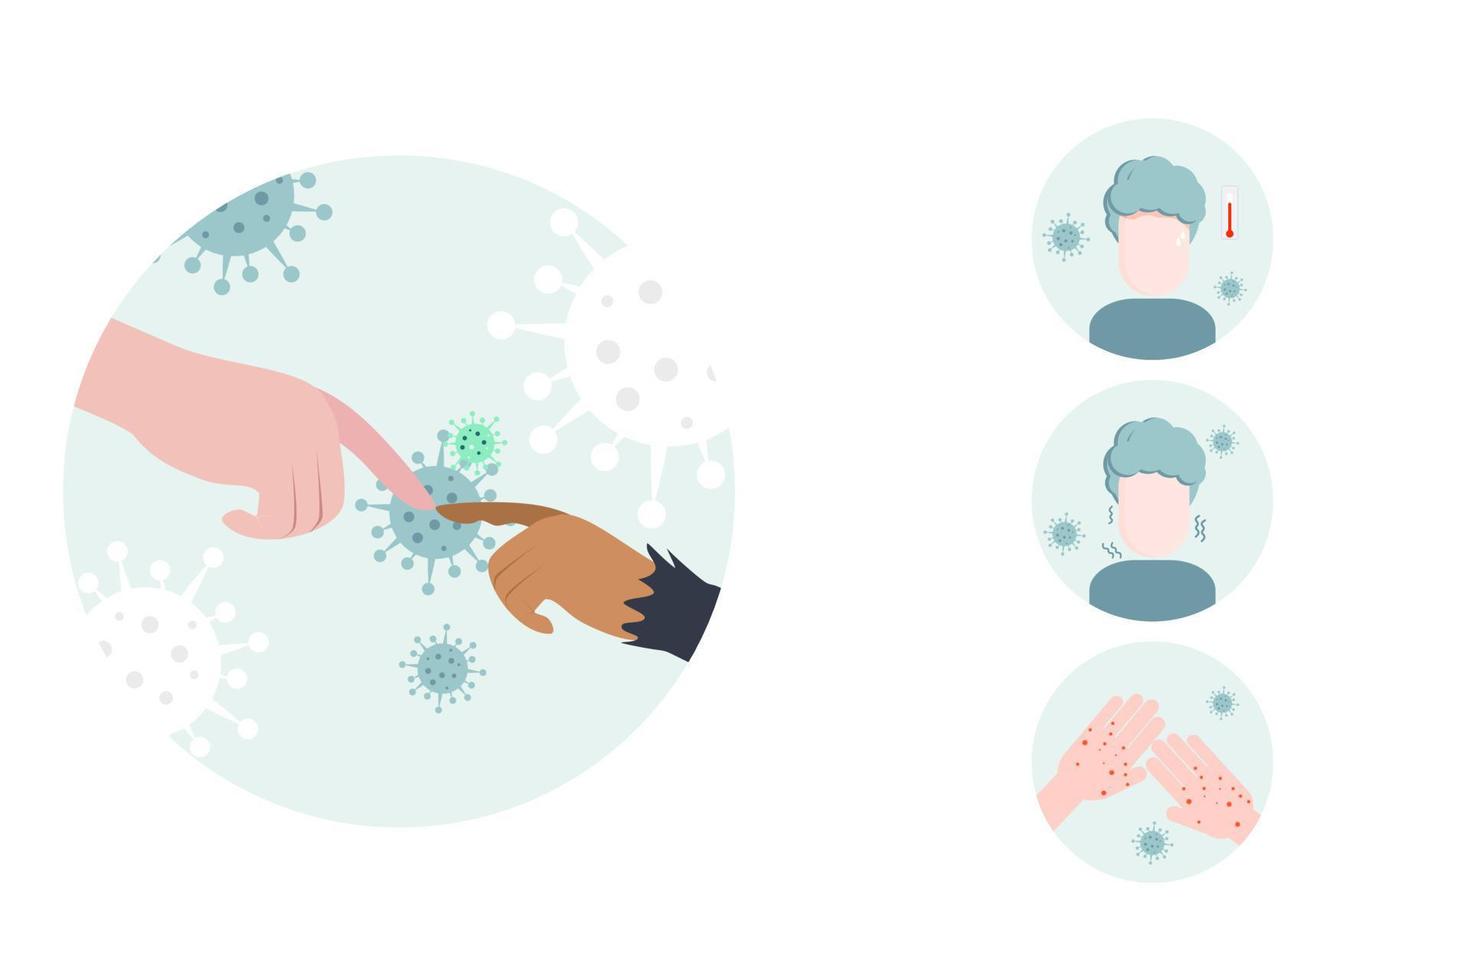 Smallpox prevention concept, wear a mask, wash your hands regularly, stay away from infected people and get vaccinated.vector  illustration,flat design. vector